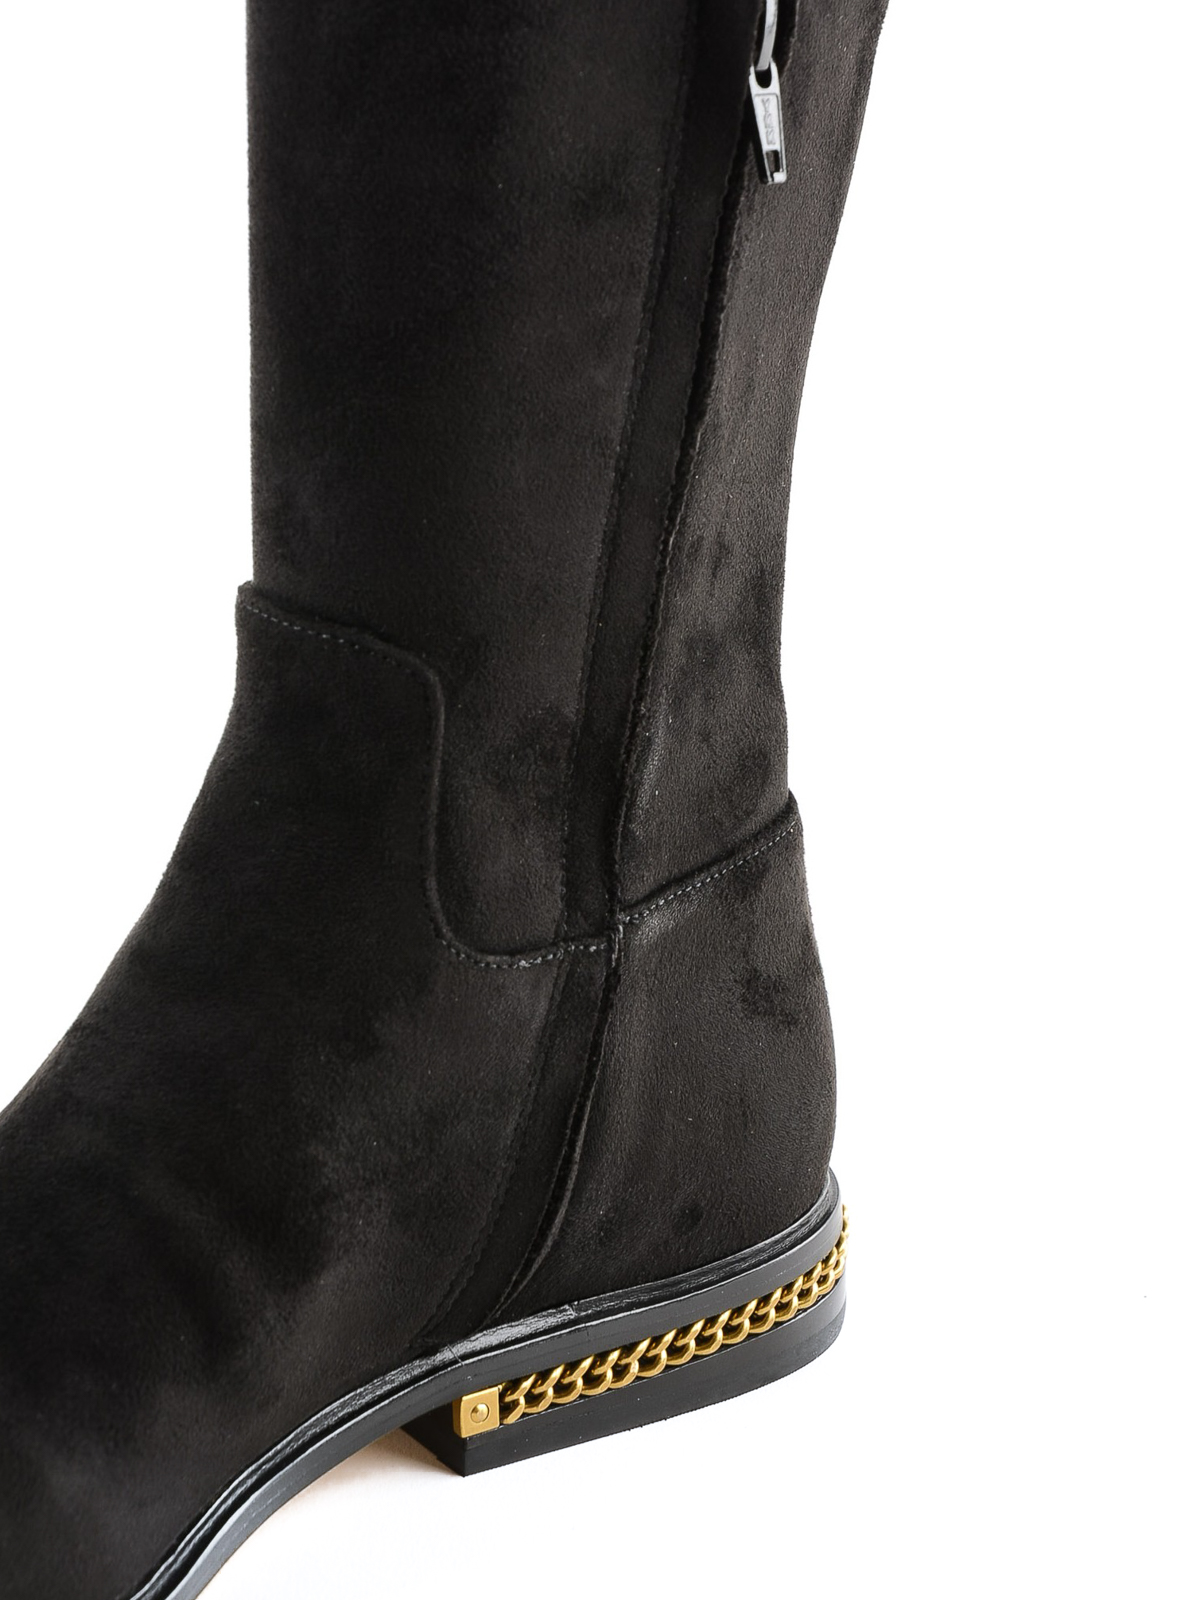 Boots Michael Kors - Jamie flat over-the-knee suede boots - 40F8JMFB5S001